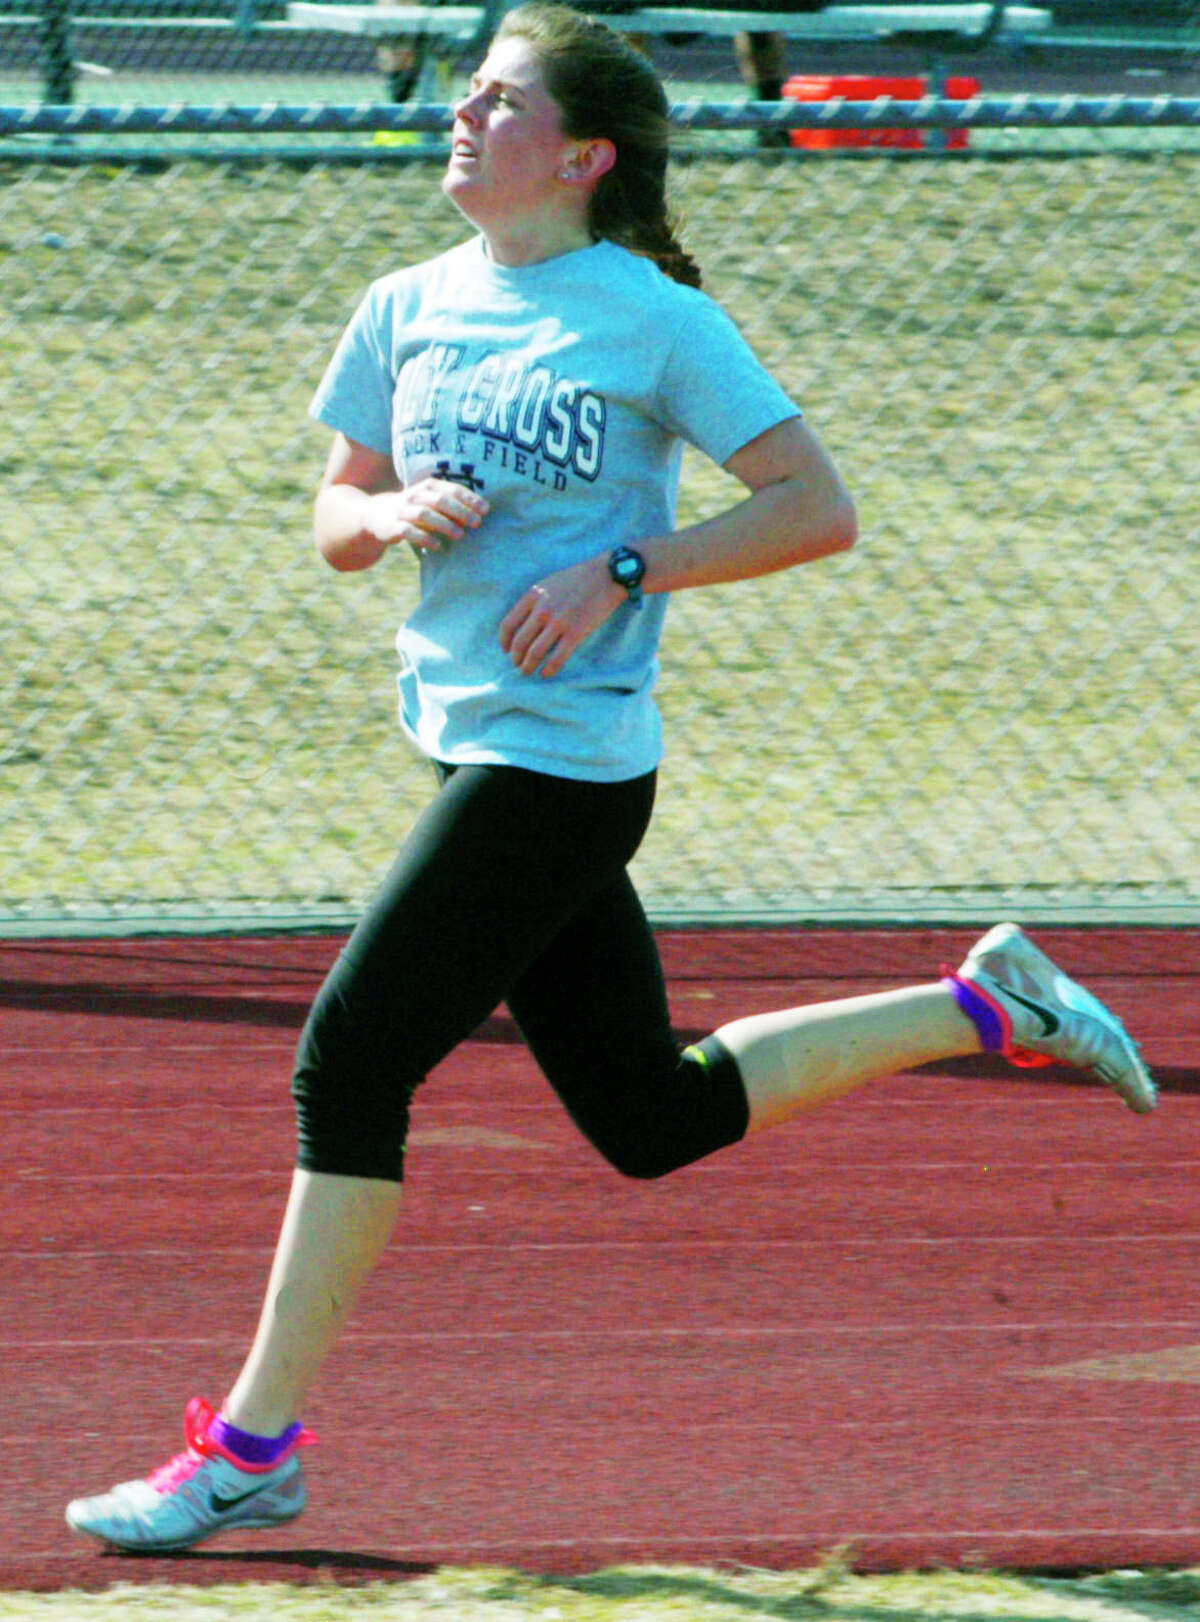 State-class middle distance runner Meghan Dietter preps for the New Milford High School girls' track season. April 2014